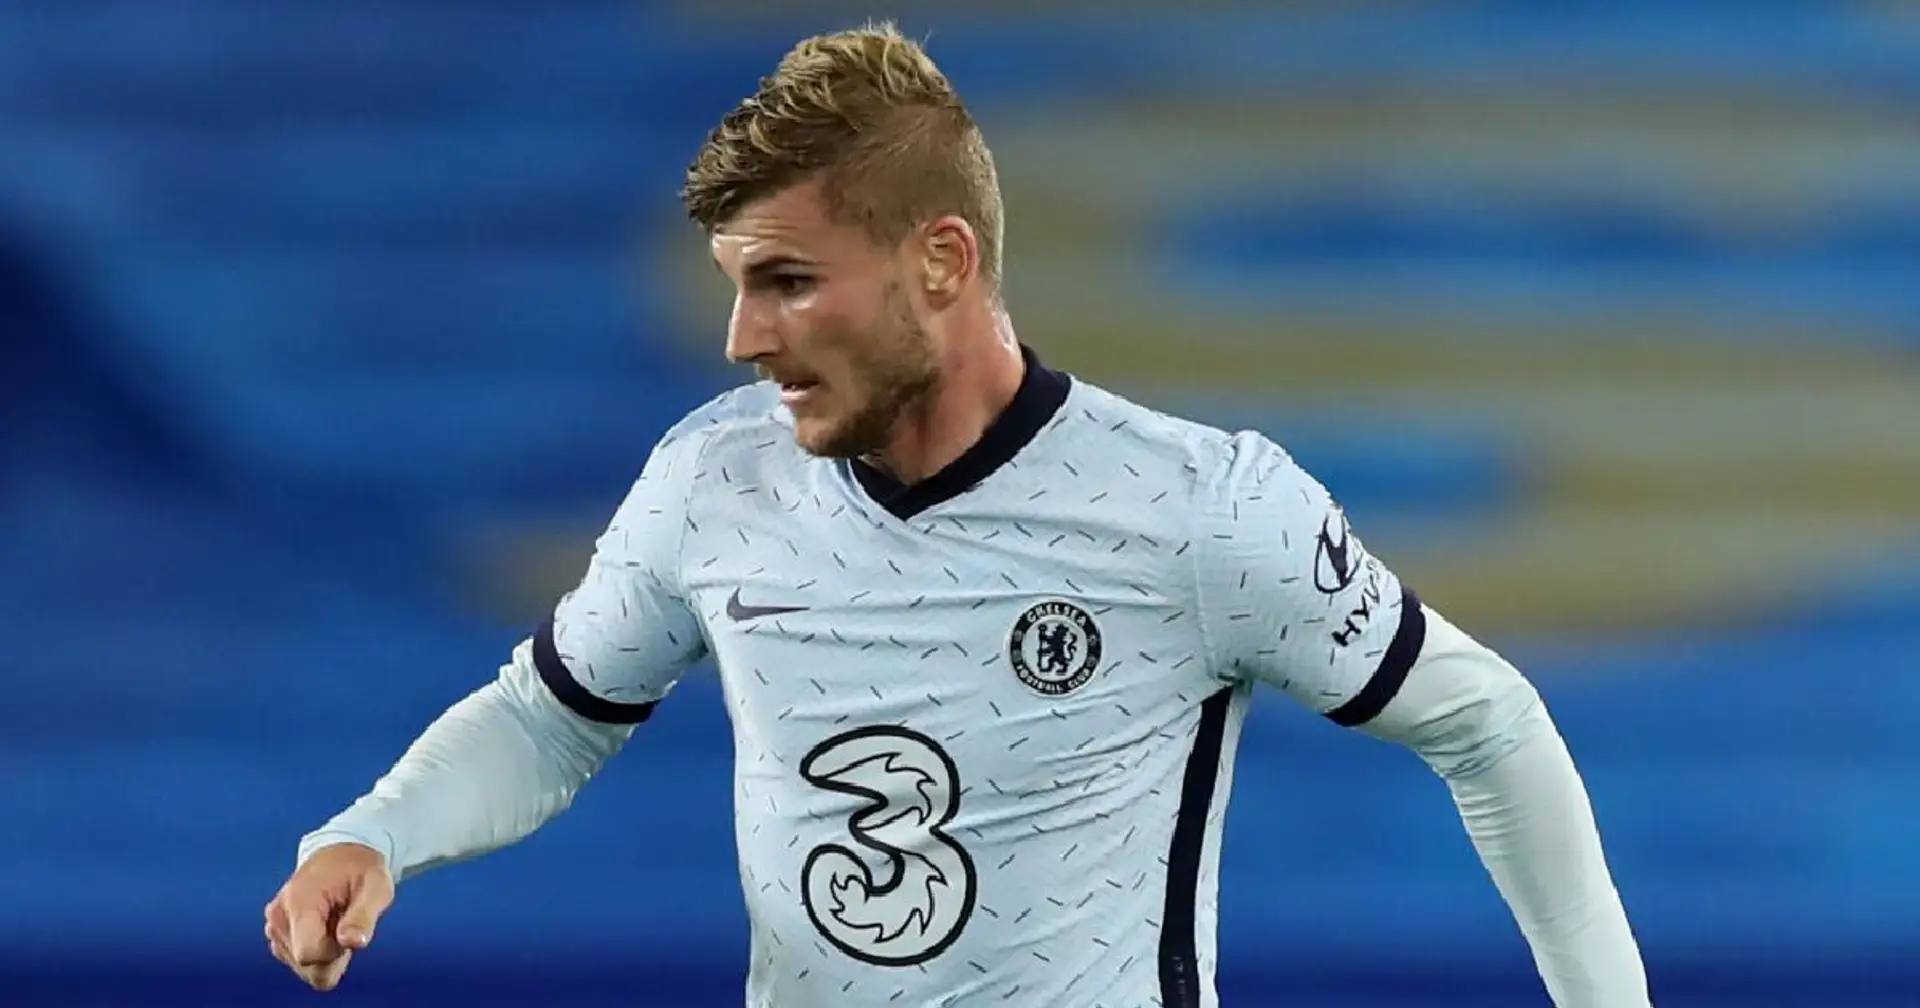 'Missed chances are a positive': Chelsea fan explains why Werner will find his feet soon enough